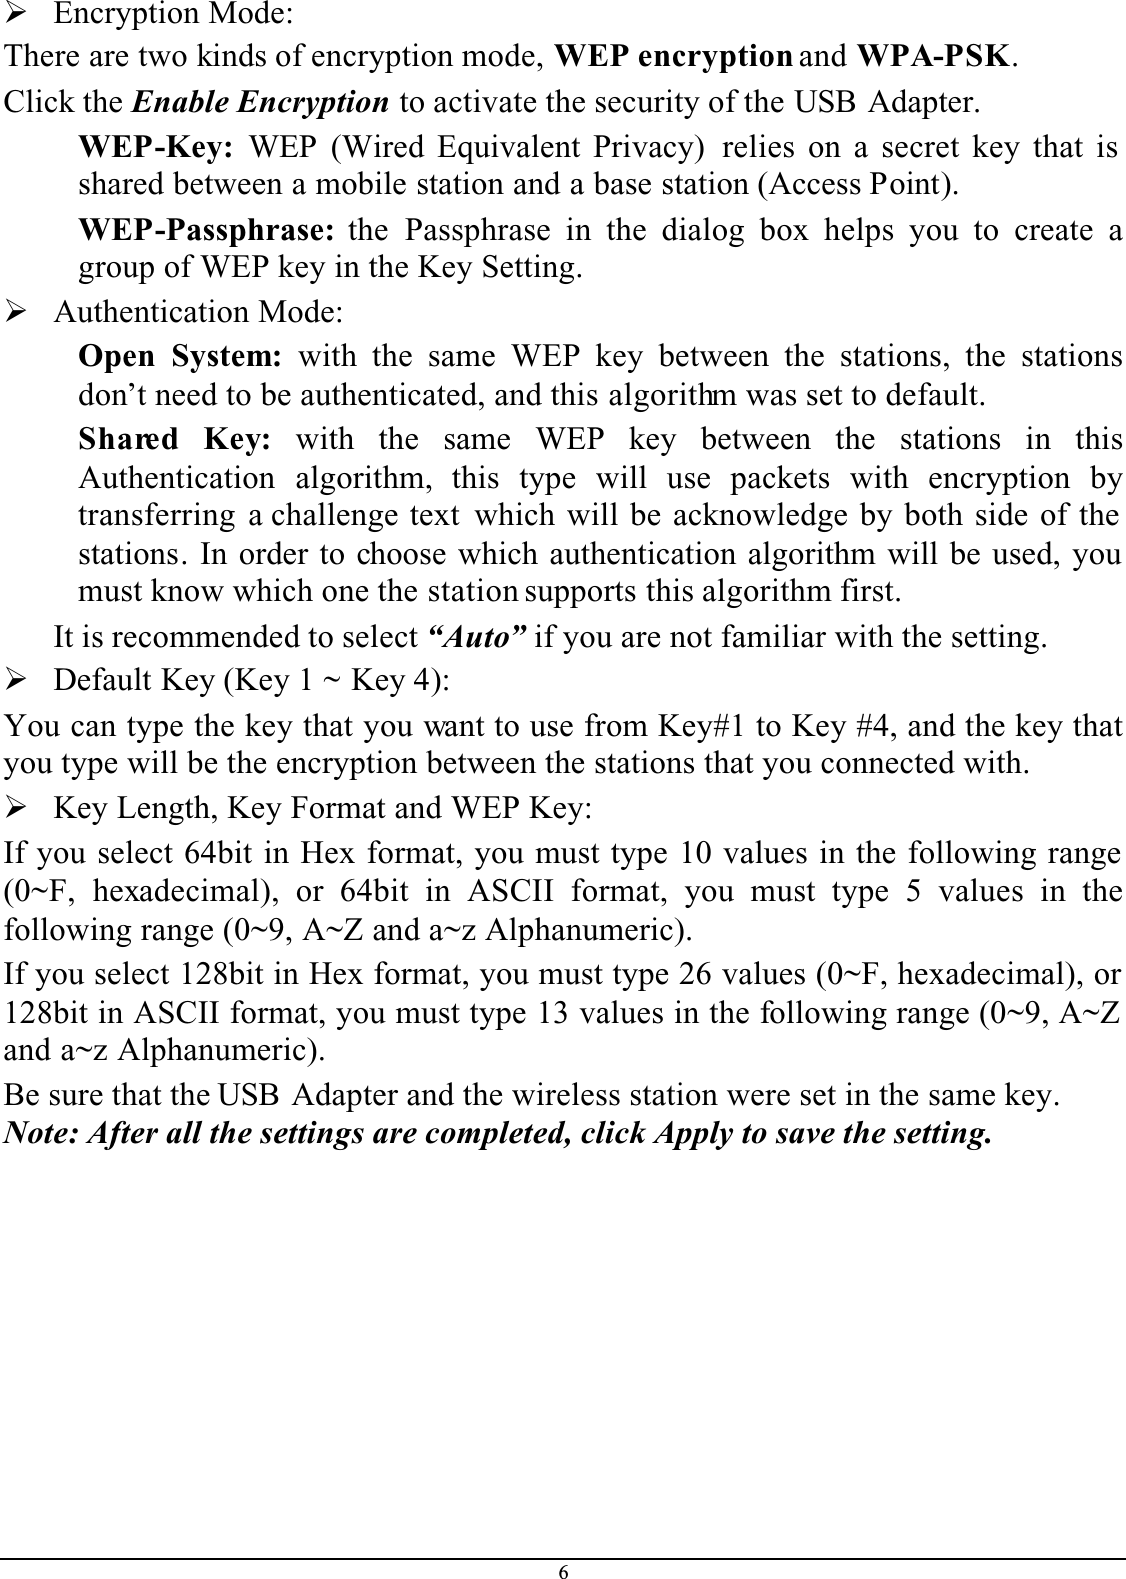 6¾Encryption Mode: There are two kinds of encryption mode, WEP encryption and WPA-PSK.Click the Enable Encryption to activate the security of the USB Adapter.WEP-Key: WEP (Wired Equivalent Privacy)  relies on a secret key that is shared between a mobile station and a base station (Access Point).WEP-Passphrase: the Passphrase in the dialog box helps you to create agroup of WEP key in the Key Setting.¾Authentication Mode: Open System: with the same WEP key between the stations, the stationsdon’t need to be authenticated, and this algorithm was set to default.Shared Key: with the same WEP key between the stations in thisAuthentication algorithm, this type will use packets with encryption bytransferring a challenge text which will be acknowledge by both side of the stations. In order to choose which authentication algorithm will be used, you must know which one the station supports this algorithm first.It is recommended to select “Auto” if you are not familiar with the setting.¾Default Key (Key 1 ~ Key 4):You can type the key that you want to use from Key#1 to Key #4, and the key that you type will be the encryption between the stations that you connected with. ¾Key Length, Key Format and WEP Key:If you select 64bit in Hex format, you must type 10 values in the following range (0~F, hexadecimal), or 64bit in ASCII format, you must type 5 values in thefollowing range (0~9, A~Z and a~z Alphanumeric). If you select 128bit in Hex format, you must type 26 values (0~F, hexadecimal), or 128bit in ASCII format, you must type 13 values in the following range (0~9, A~Z and a~z Alphanumeric).Be sure that the USB Adapter and the wireless station were set in the same key.Note: After all the settings are completed, click Apply to save the setting.